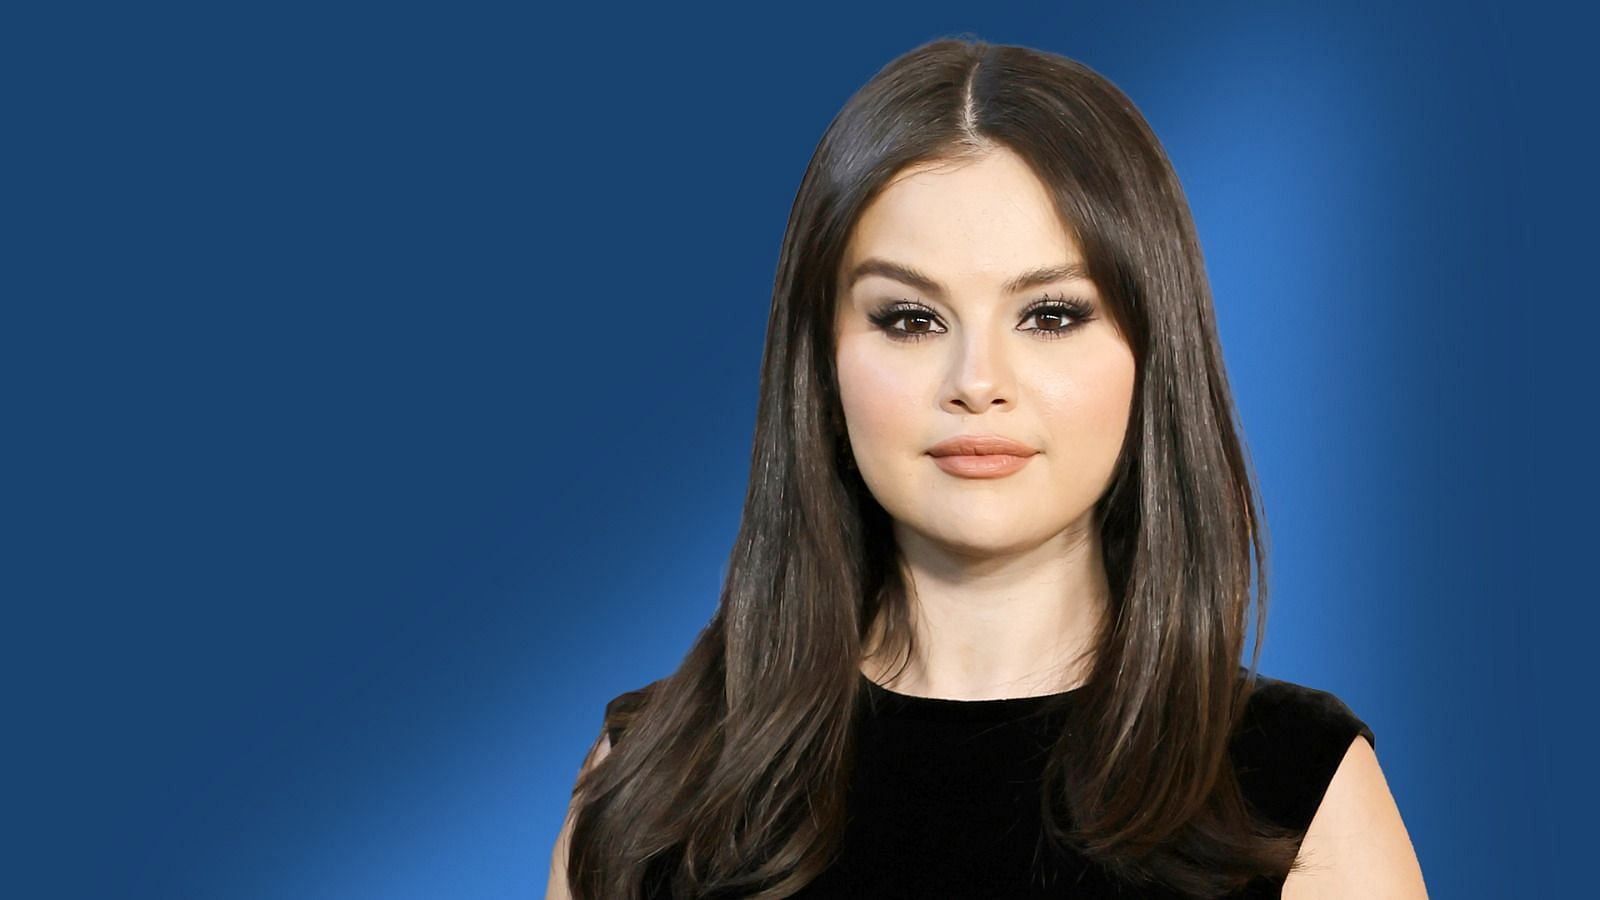 Selena Gomez in Celebrities with Mental Illness (Image via Getty Images)